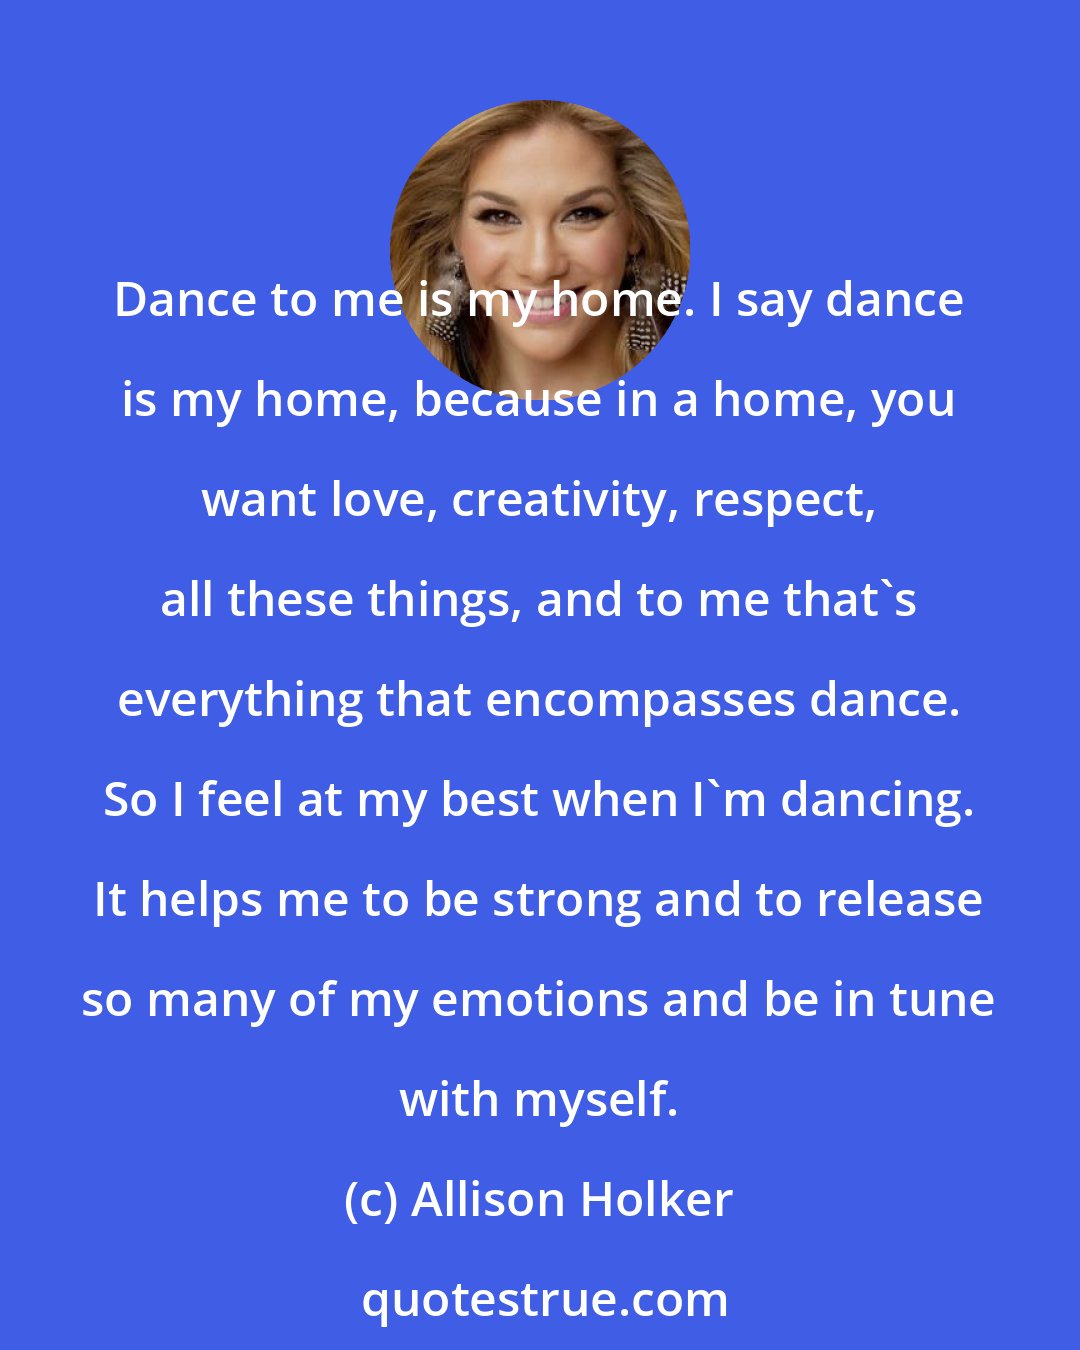 Allison Holker: Dance to me is my home. I say dance is my home, because in a home, you want love, creativity, respect, all these things, and to me that's everything that encompasses dance. So I feel at my best when I'm dancing. It helps me to be strong and to release so many of my emotions and be in tune with myself.